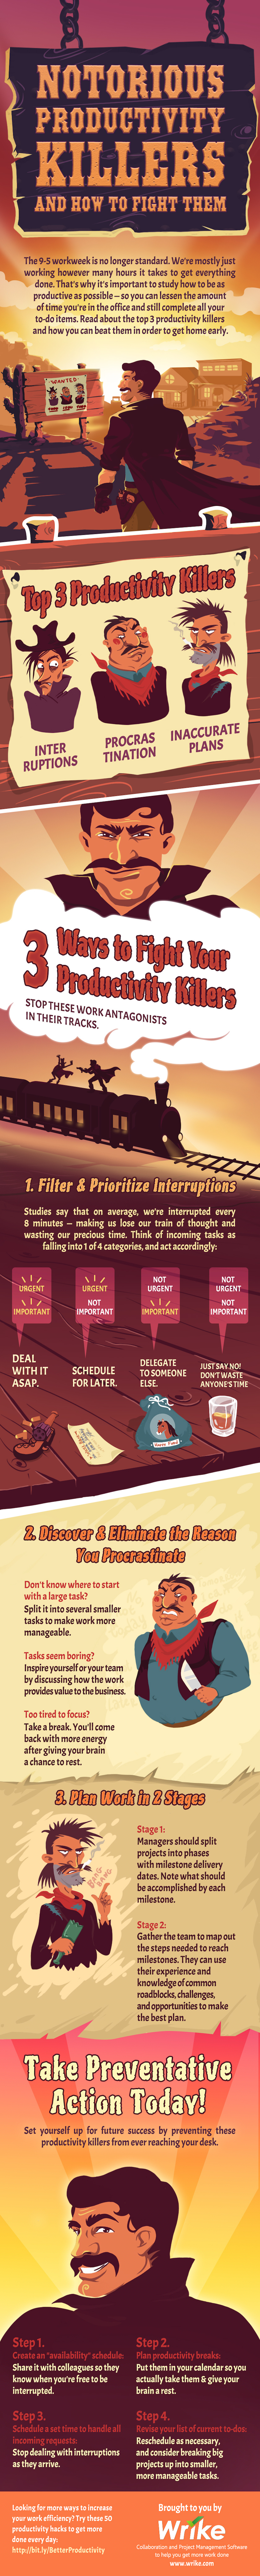 3 Notorious Productivity Killers and How to Fight Them (#Infographic)